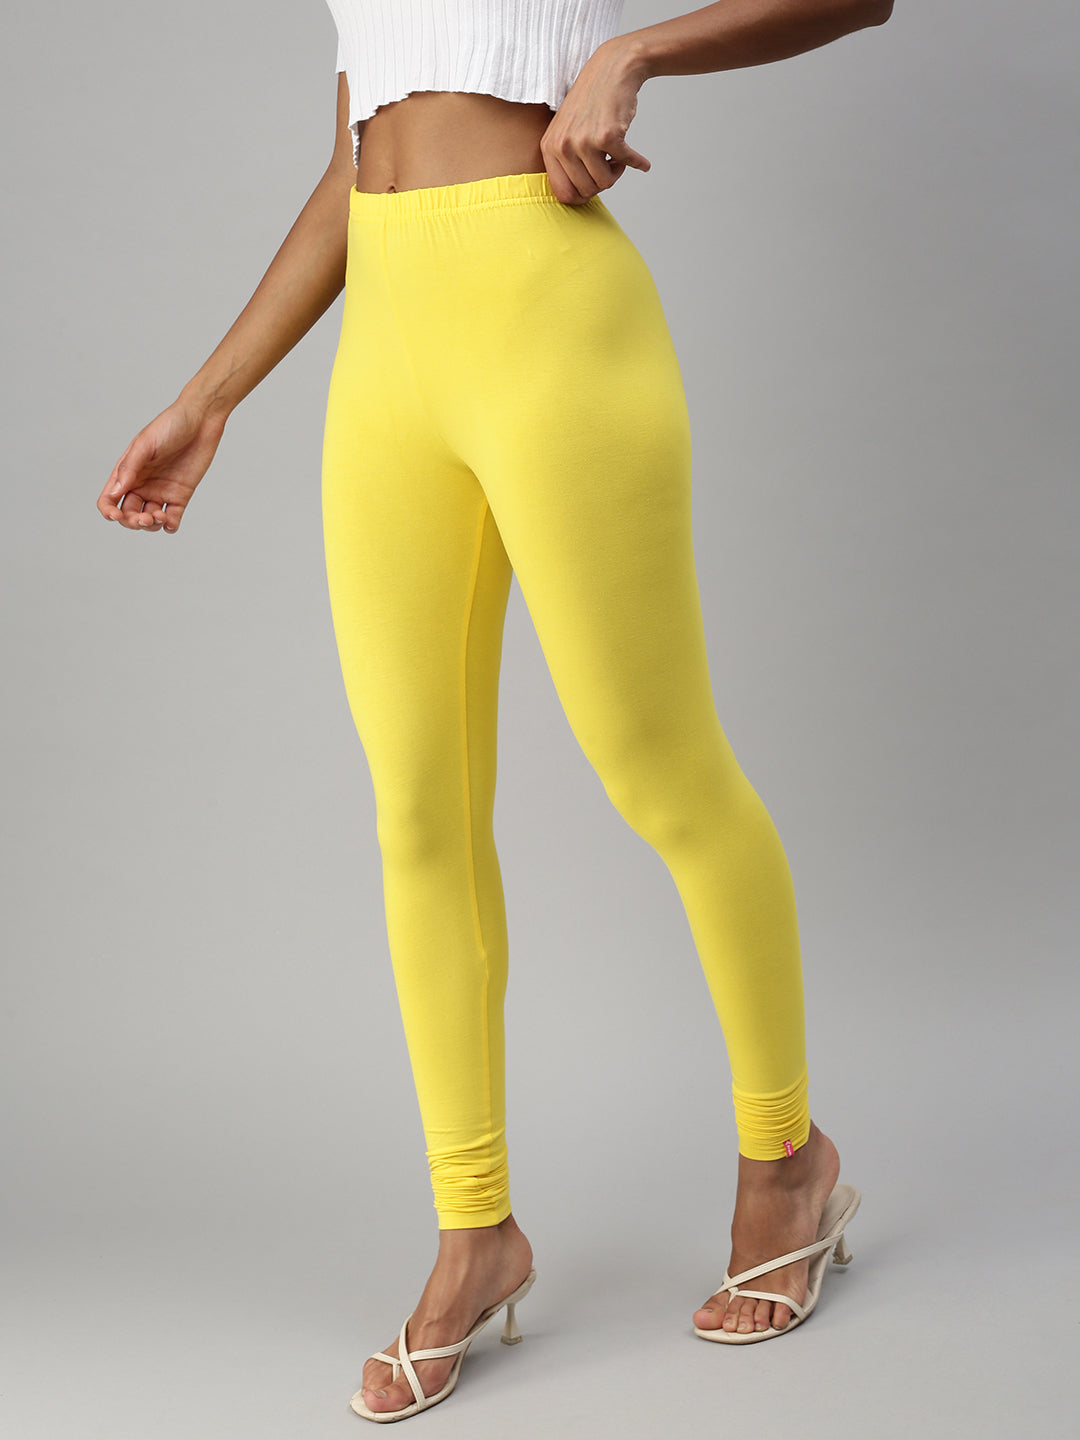 BEST YELLOW LEGGINGS Review (Testing 8 Different Brands!) Faves, Dupes, and  Duds - HopeScope, leggings, BEST YELLOW LEGGINGS Review (Testing 8  Different Brands!) Faves, Dupes, and Duds - HopeScope